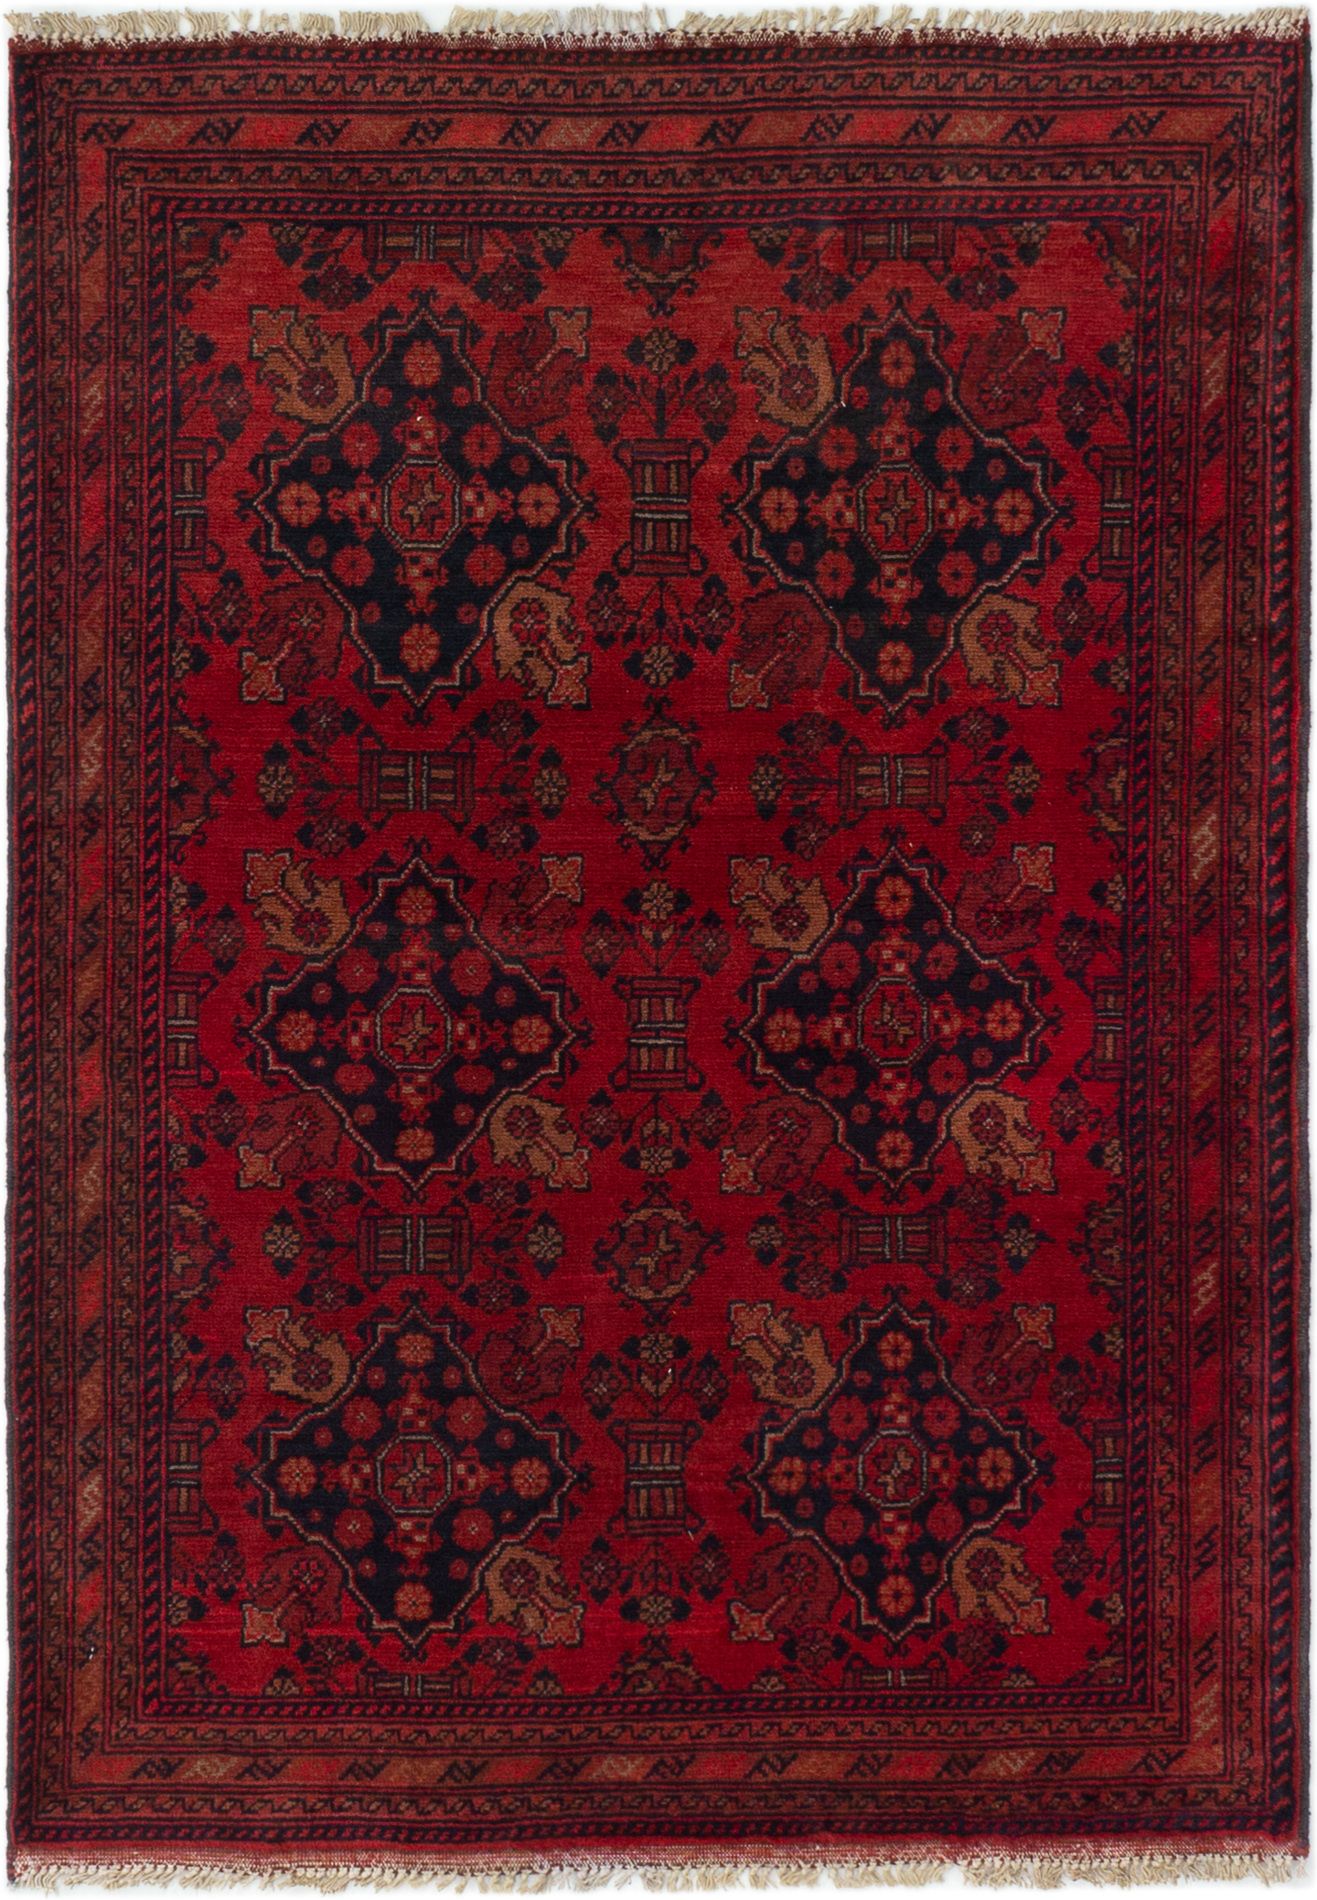 Hand-knotted Finest Khal Mohammadi Red Wool Rug 3'7" x 4'10"  Size: 3'7" x 4'10"  